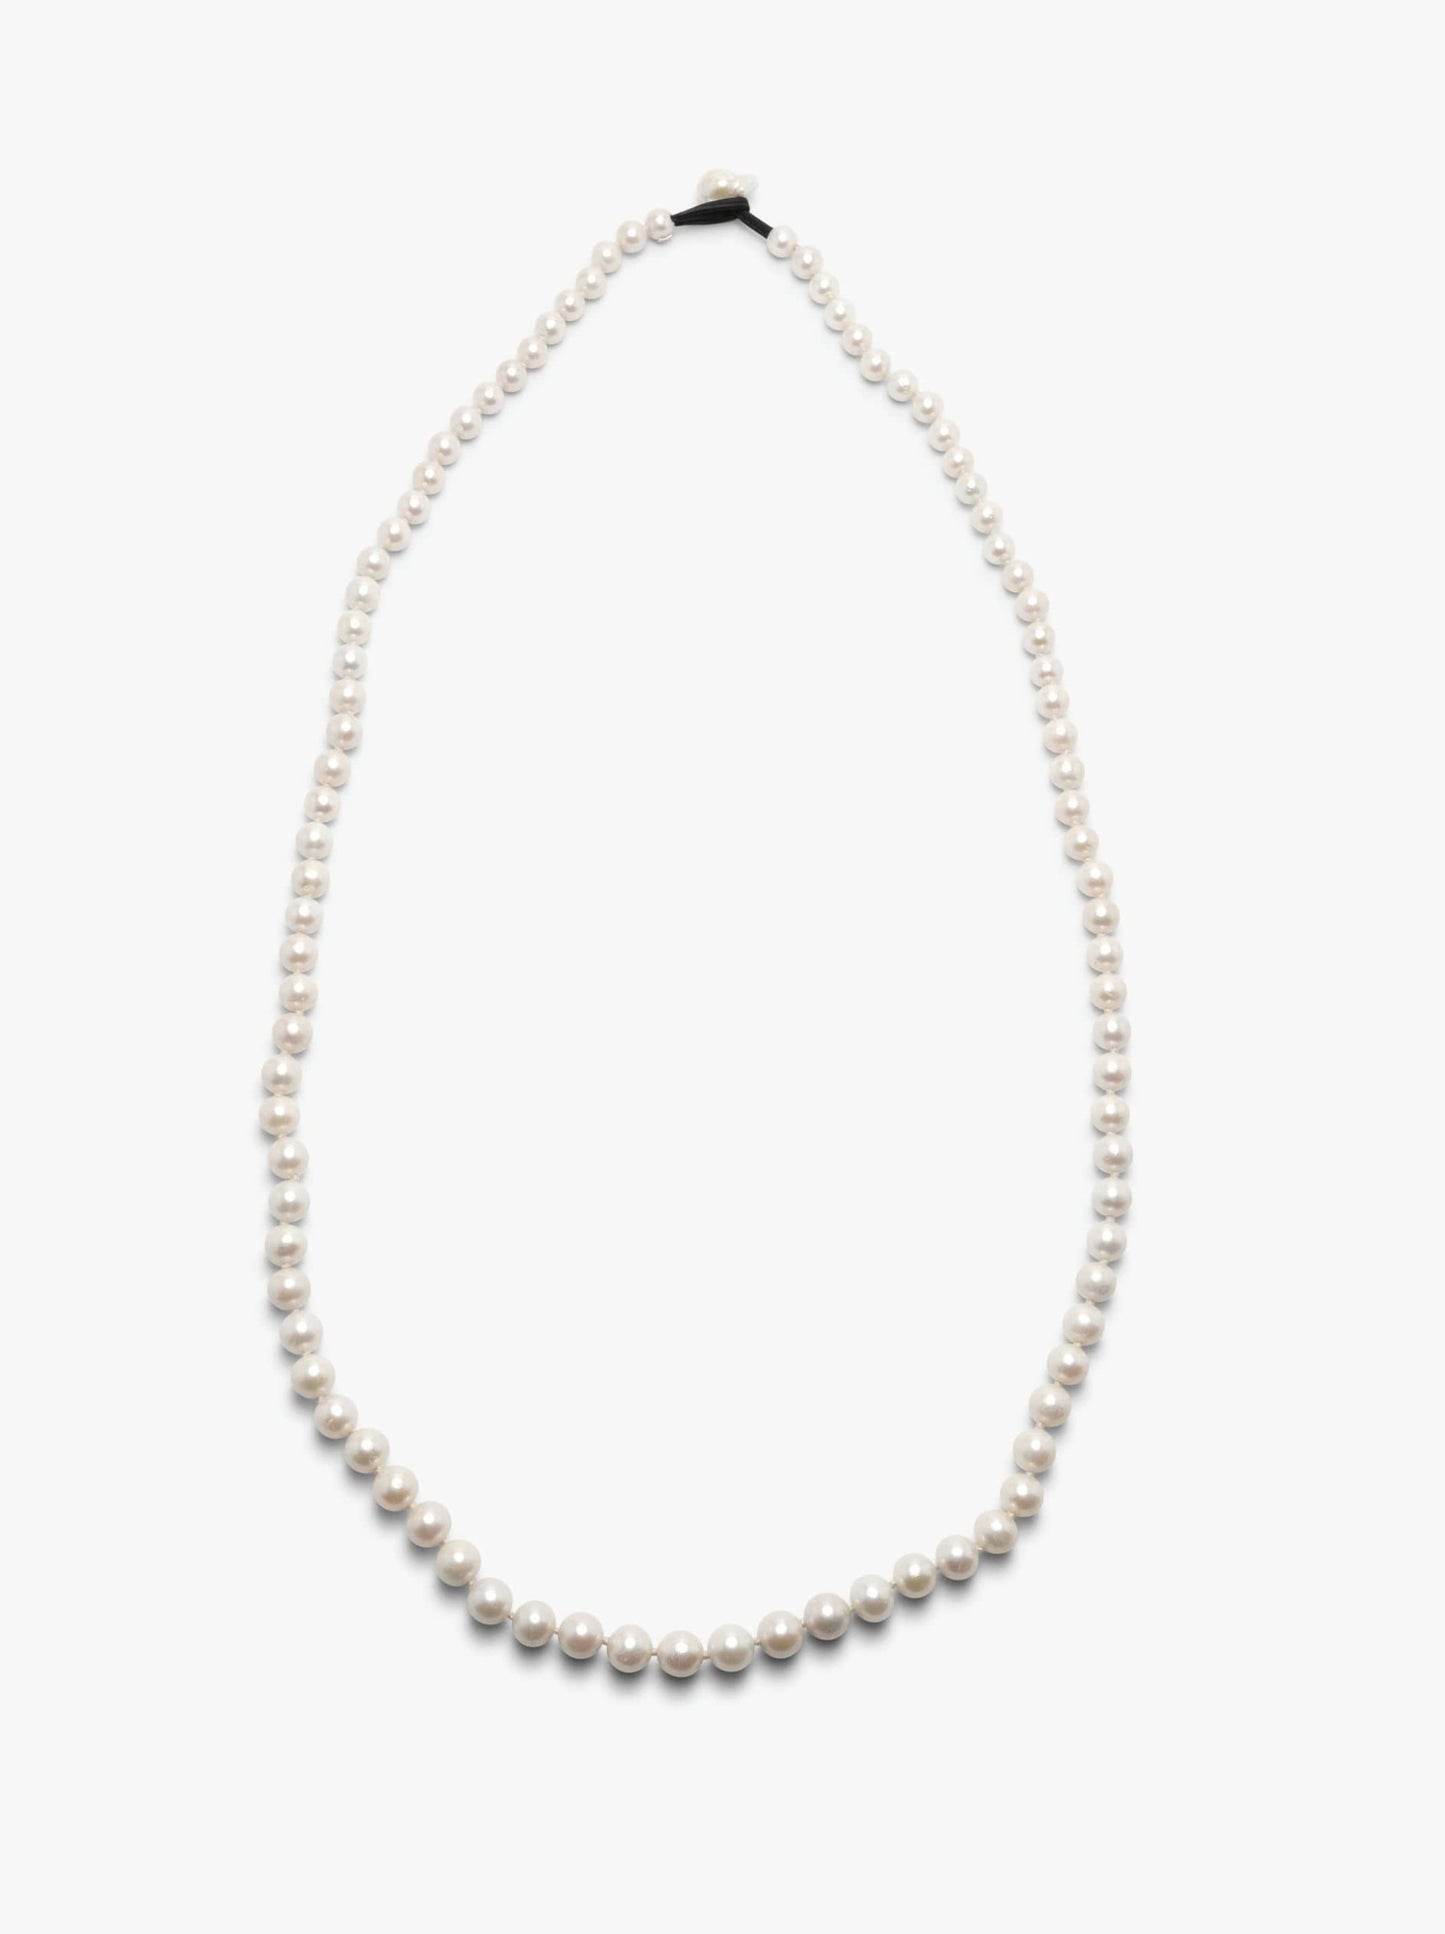 Necklace: freshwater pearls